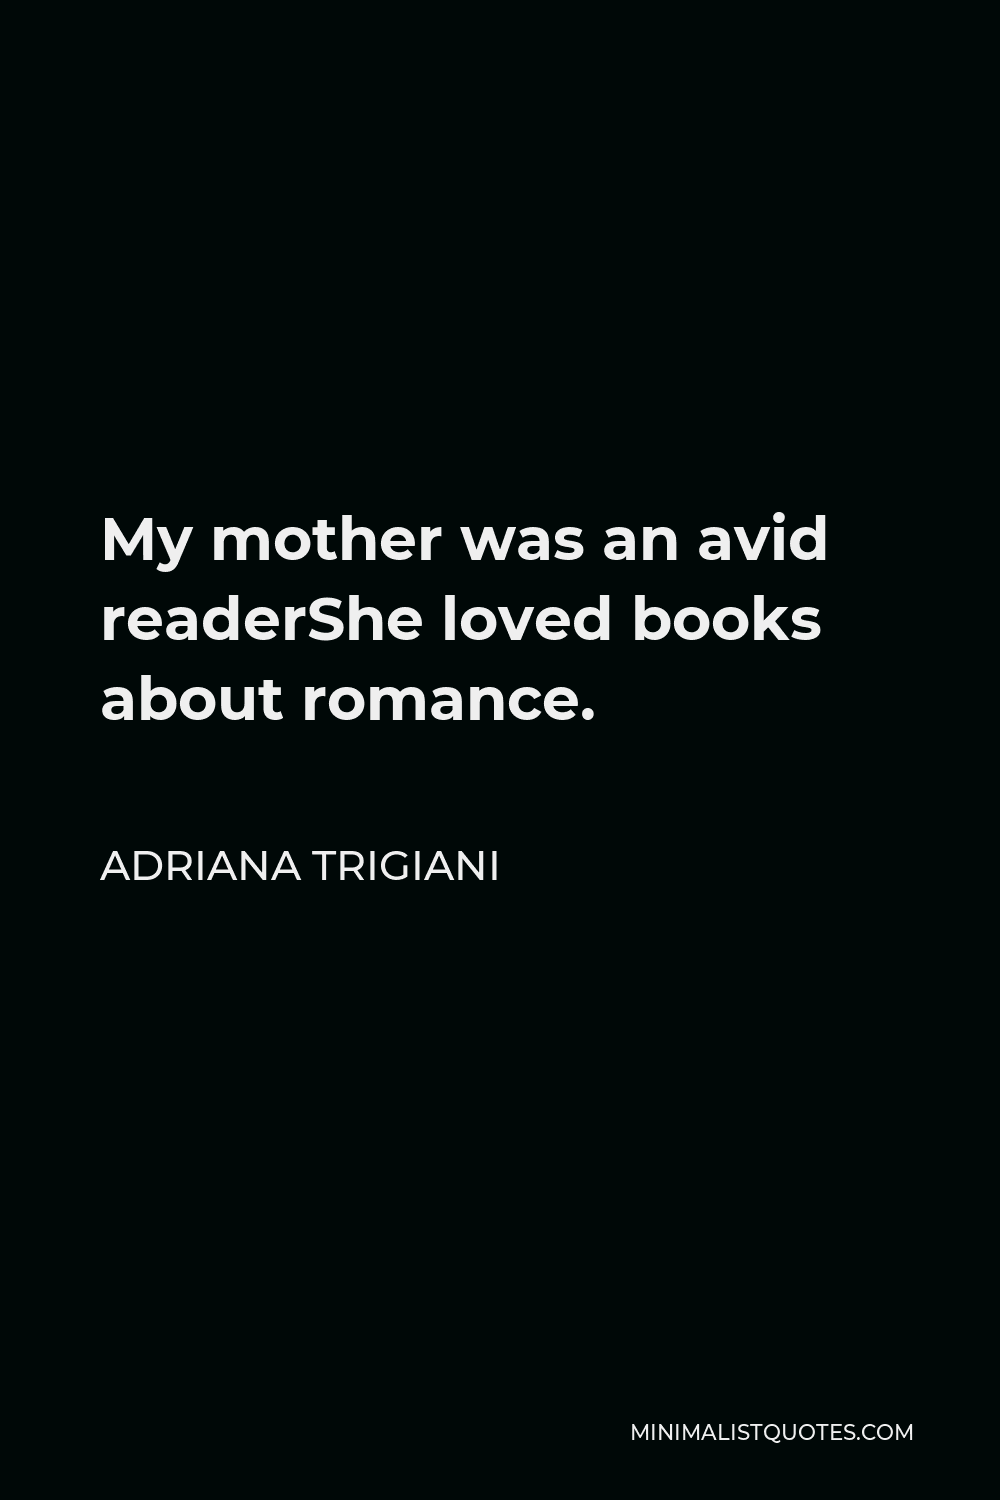 Adriana Trigiani Quote - My mother was an avid readerShe loved books about romance.